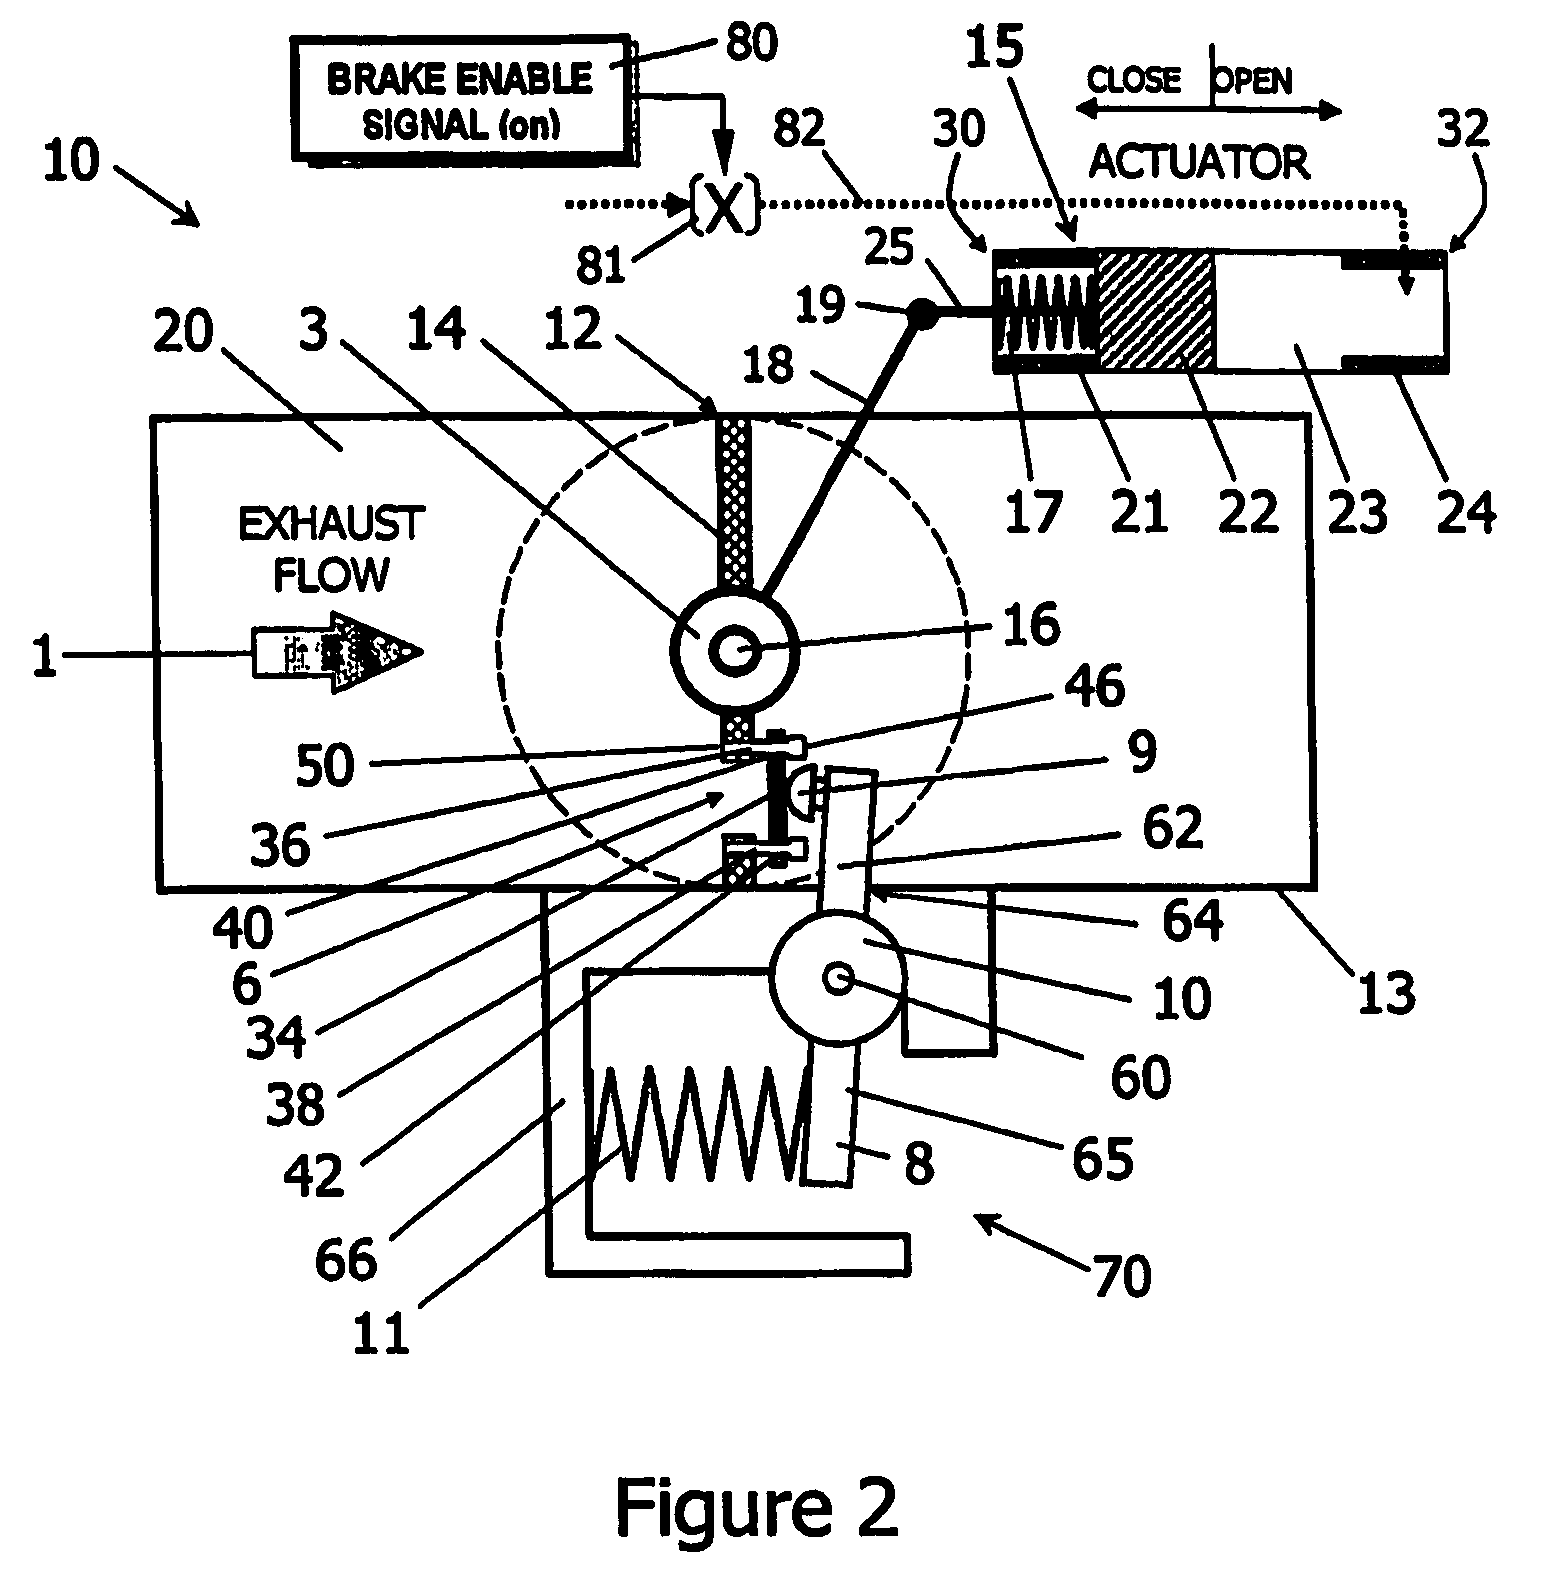 Apparatus and method for pressure relief in an exhaust brake